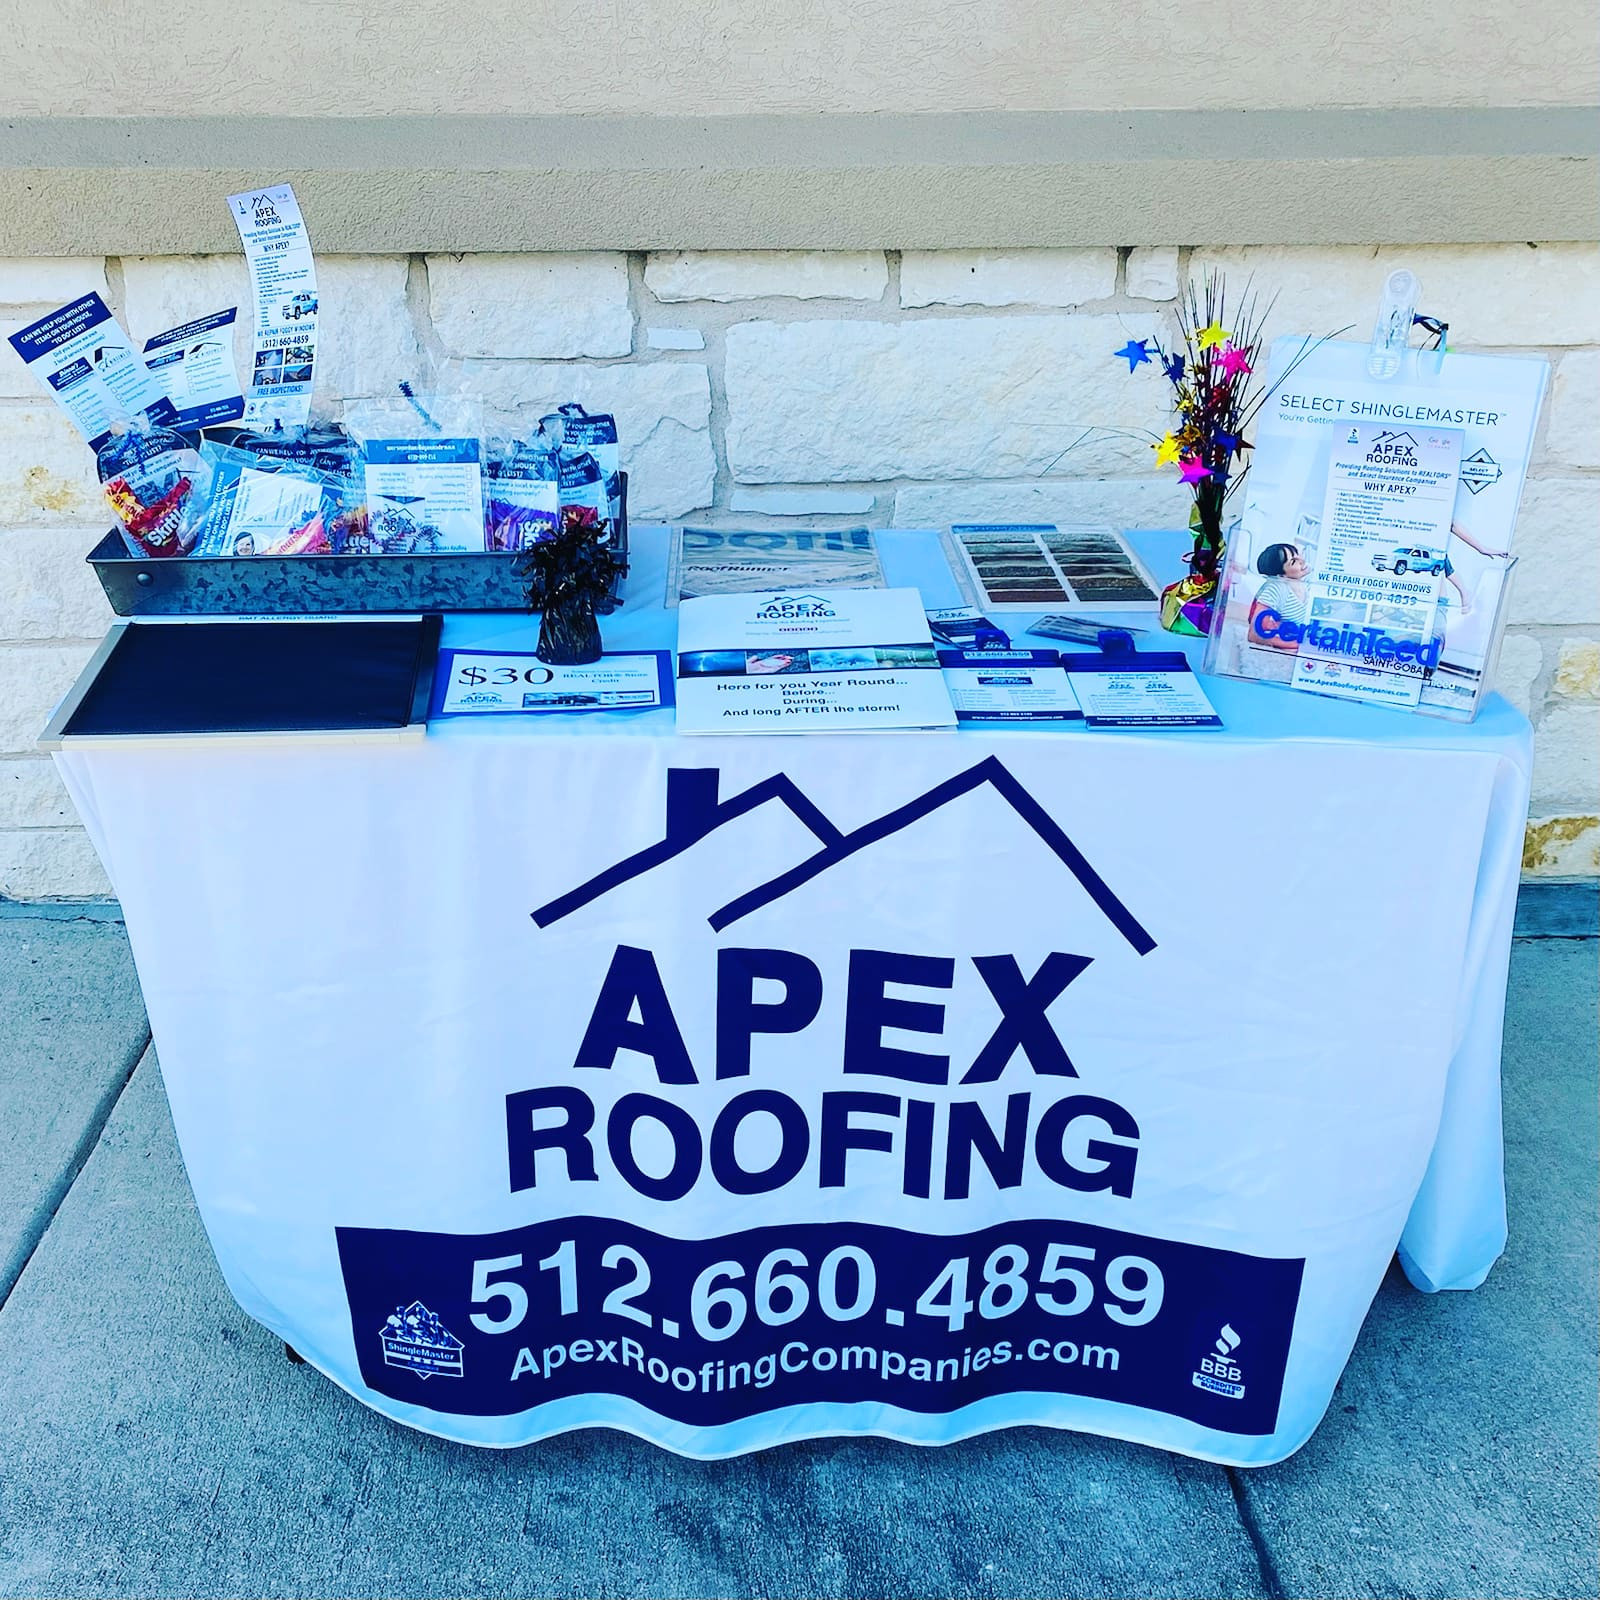 APEX Roofing and the Community